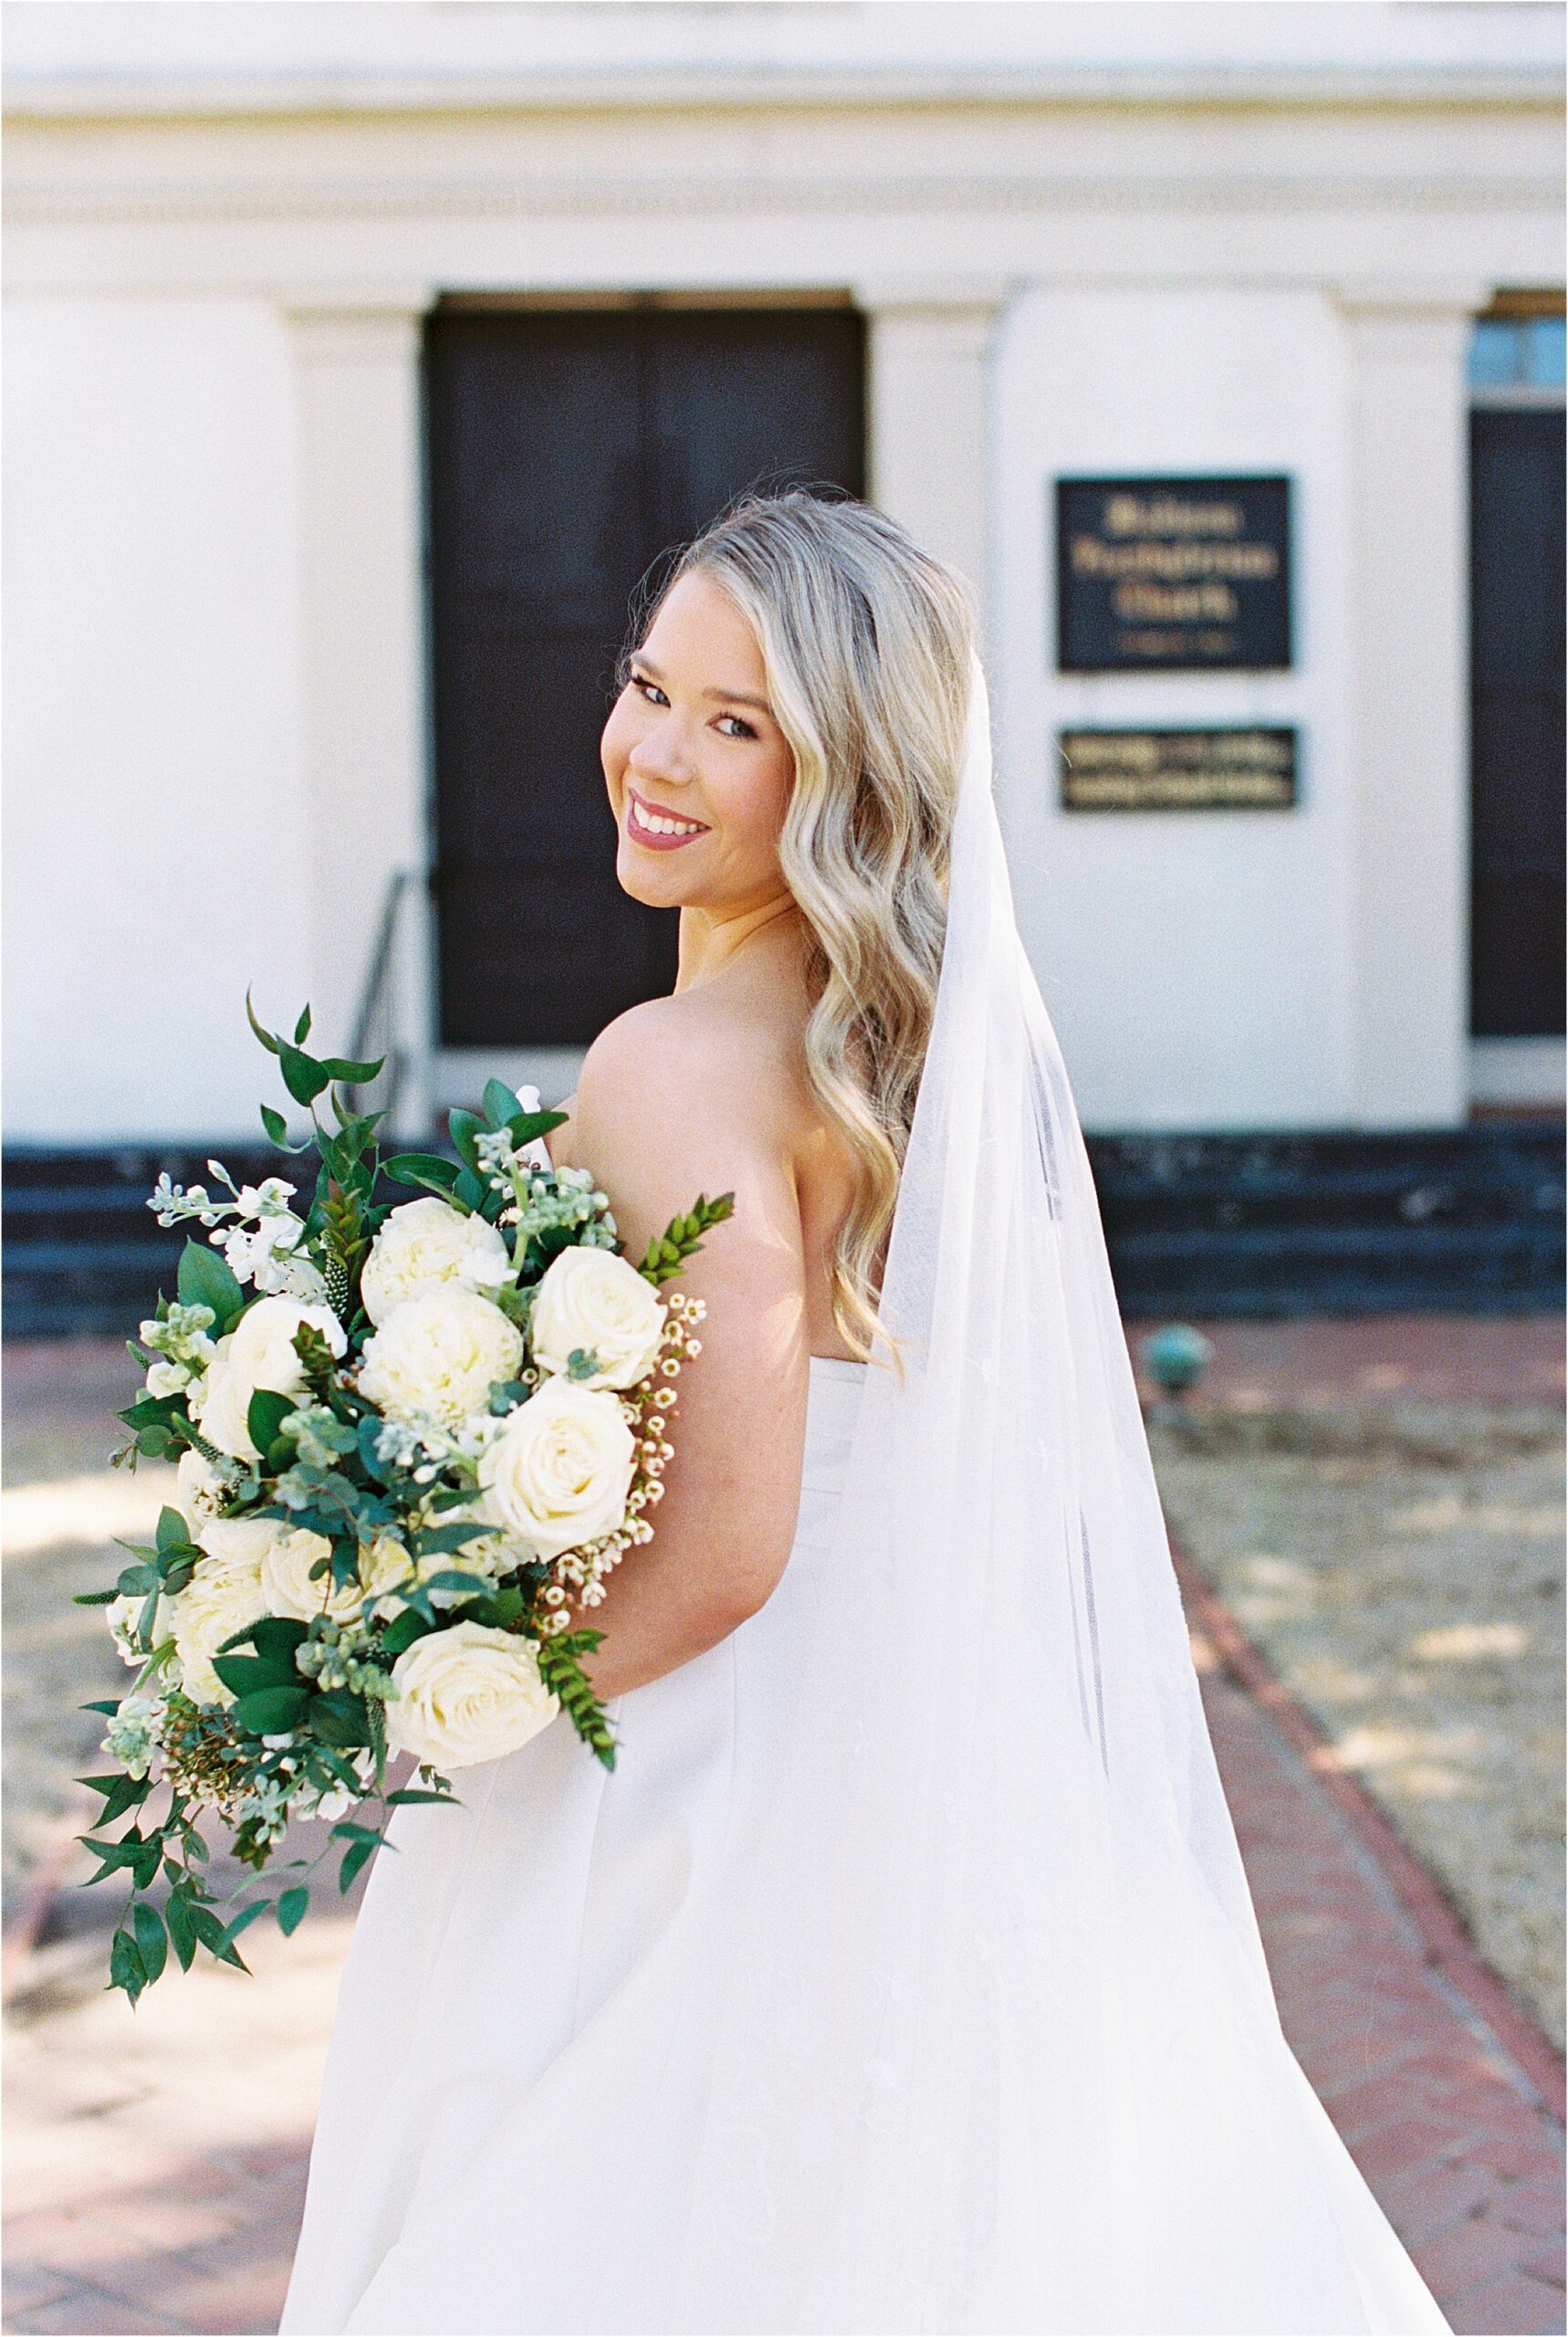 Bride in a white dress holding flowers standing in front of a white church.